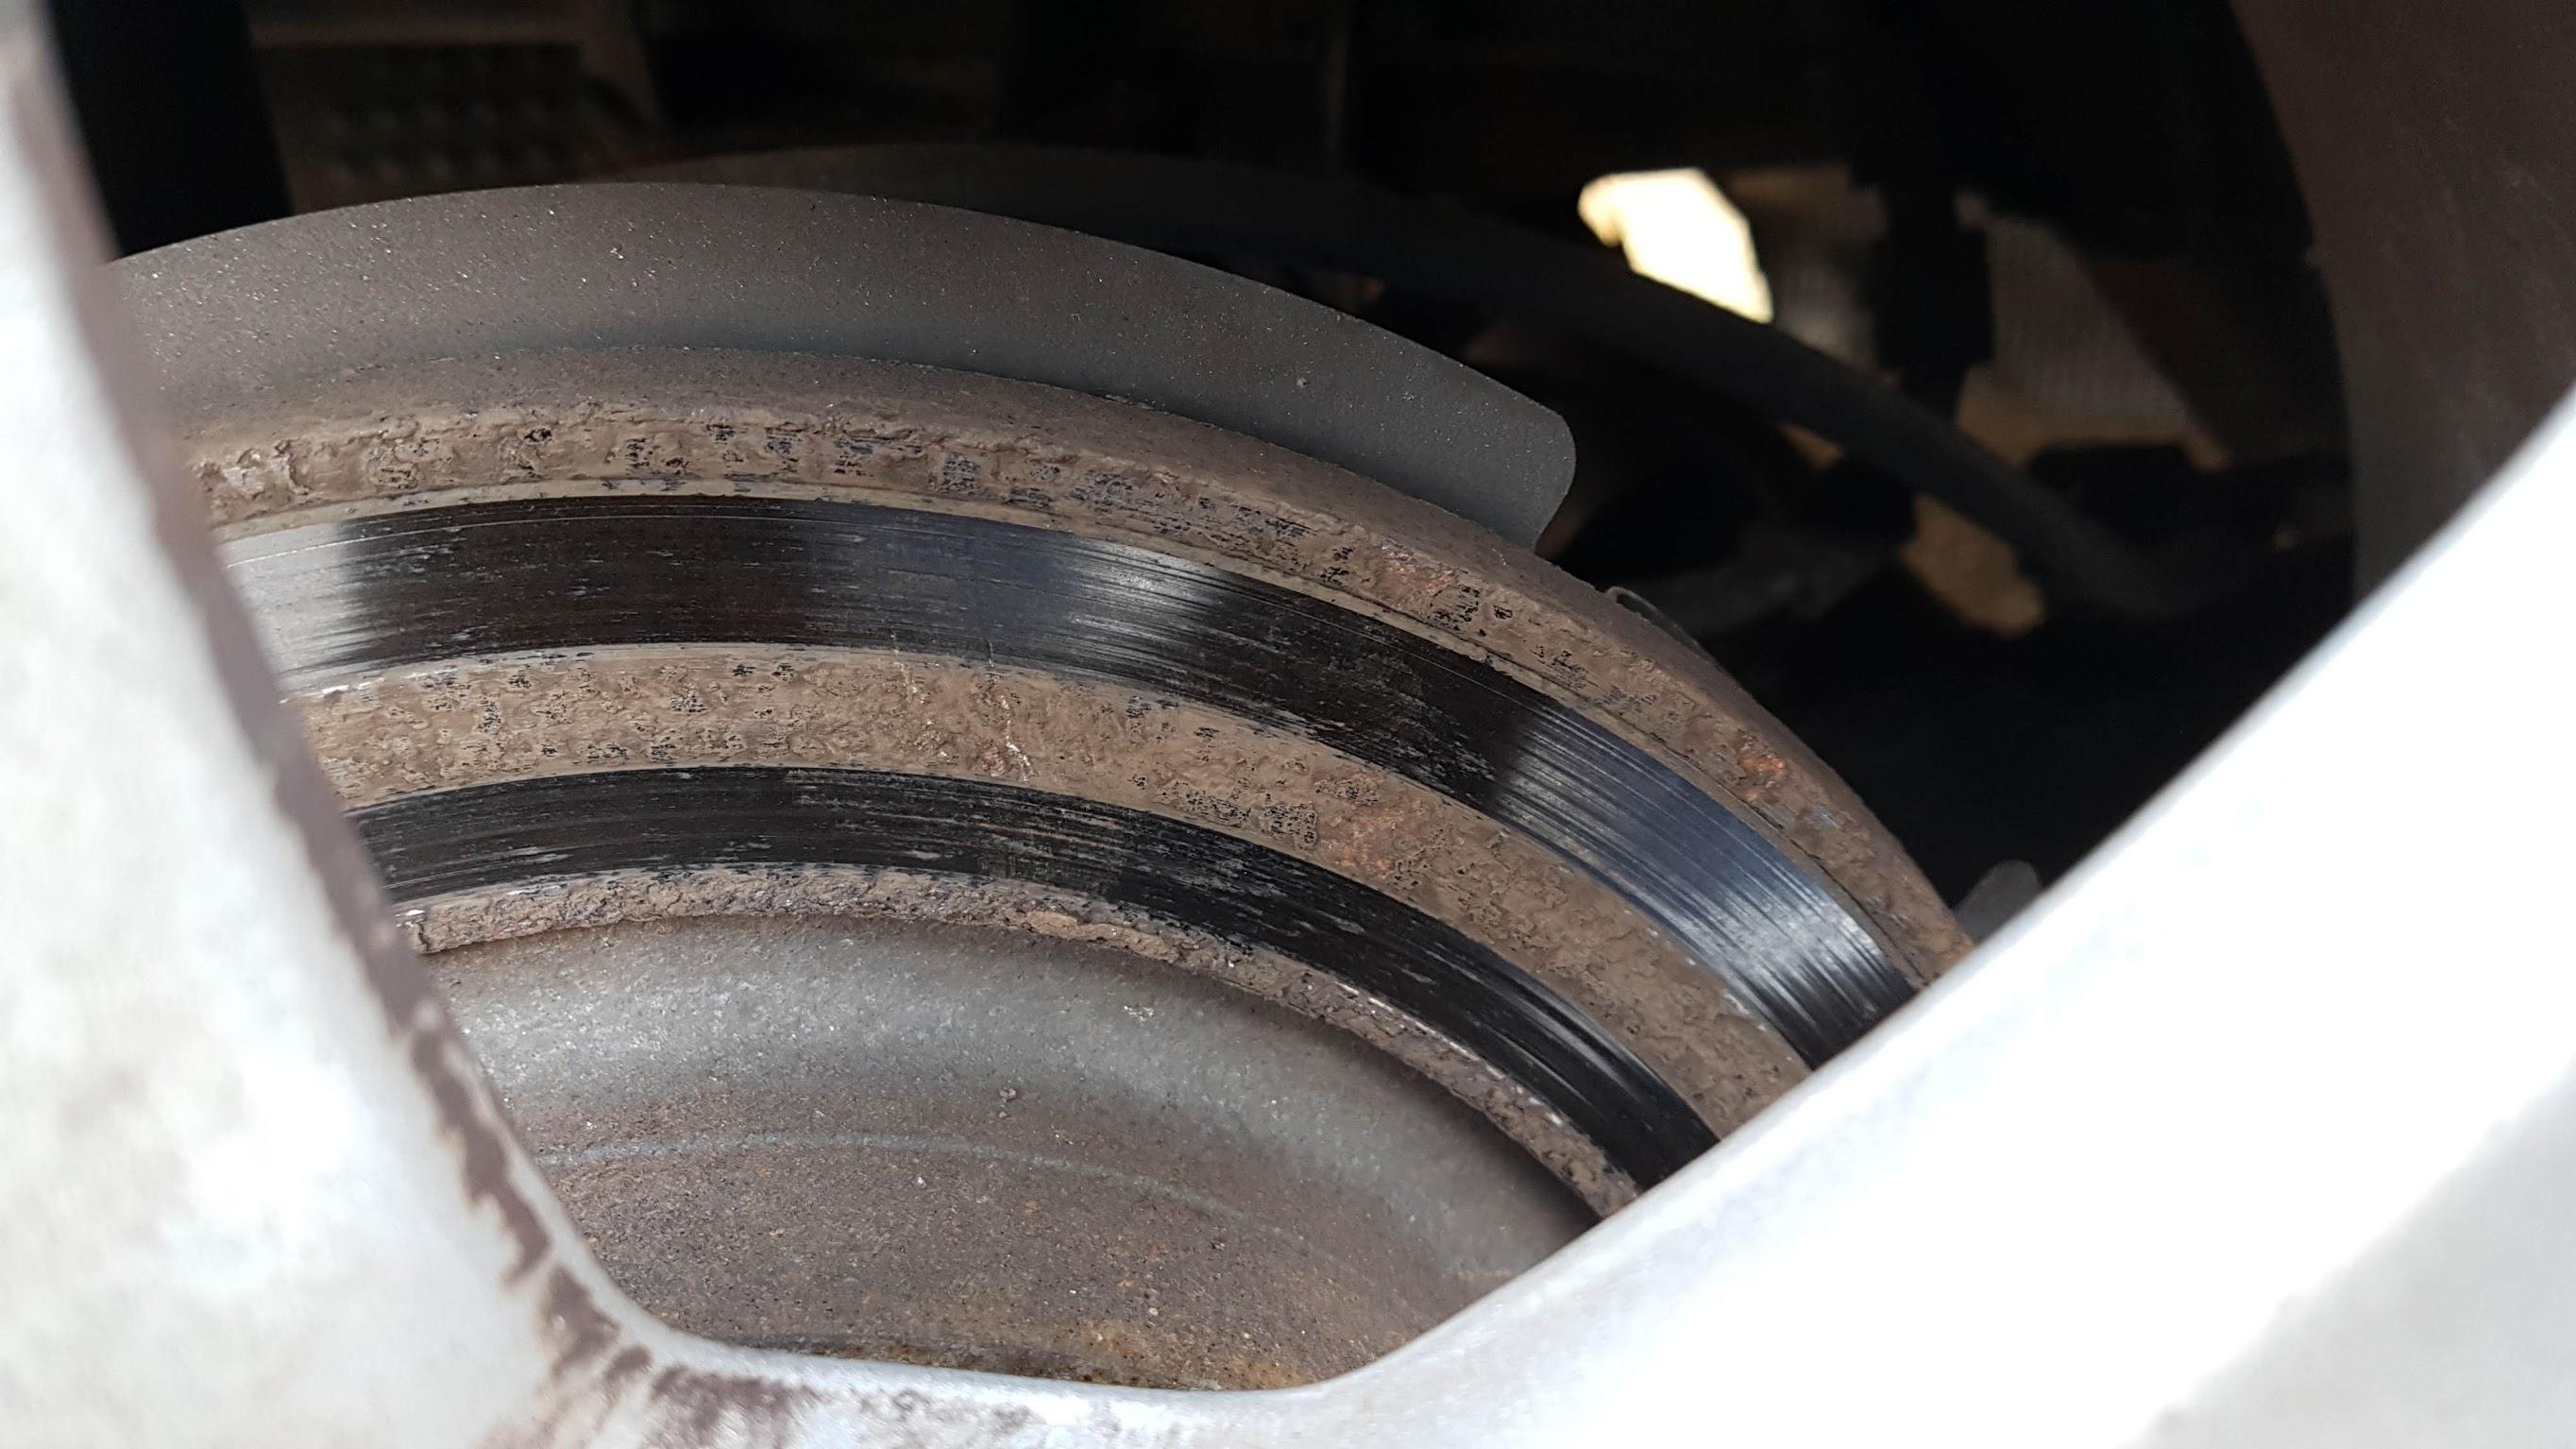 Brake Rotors - Uneven wear - Ford Fiesta Club - Ford Owners Club - Ford